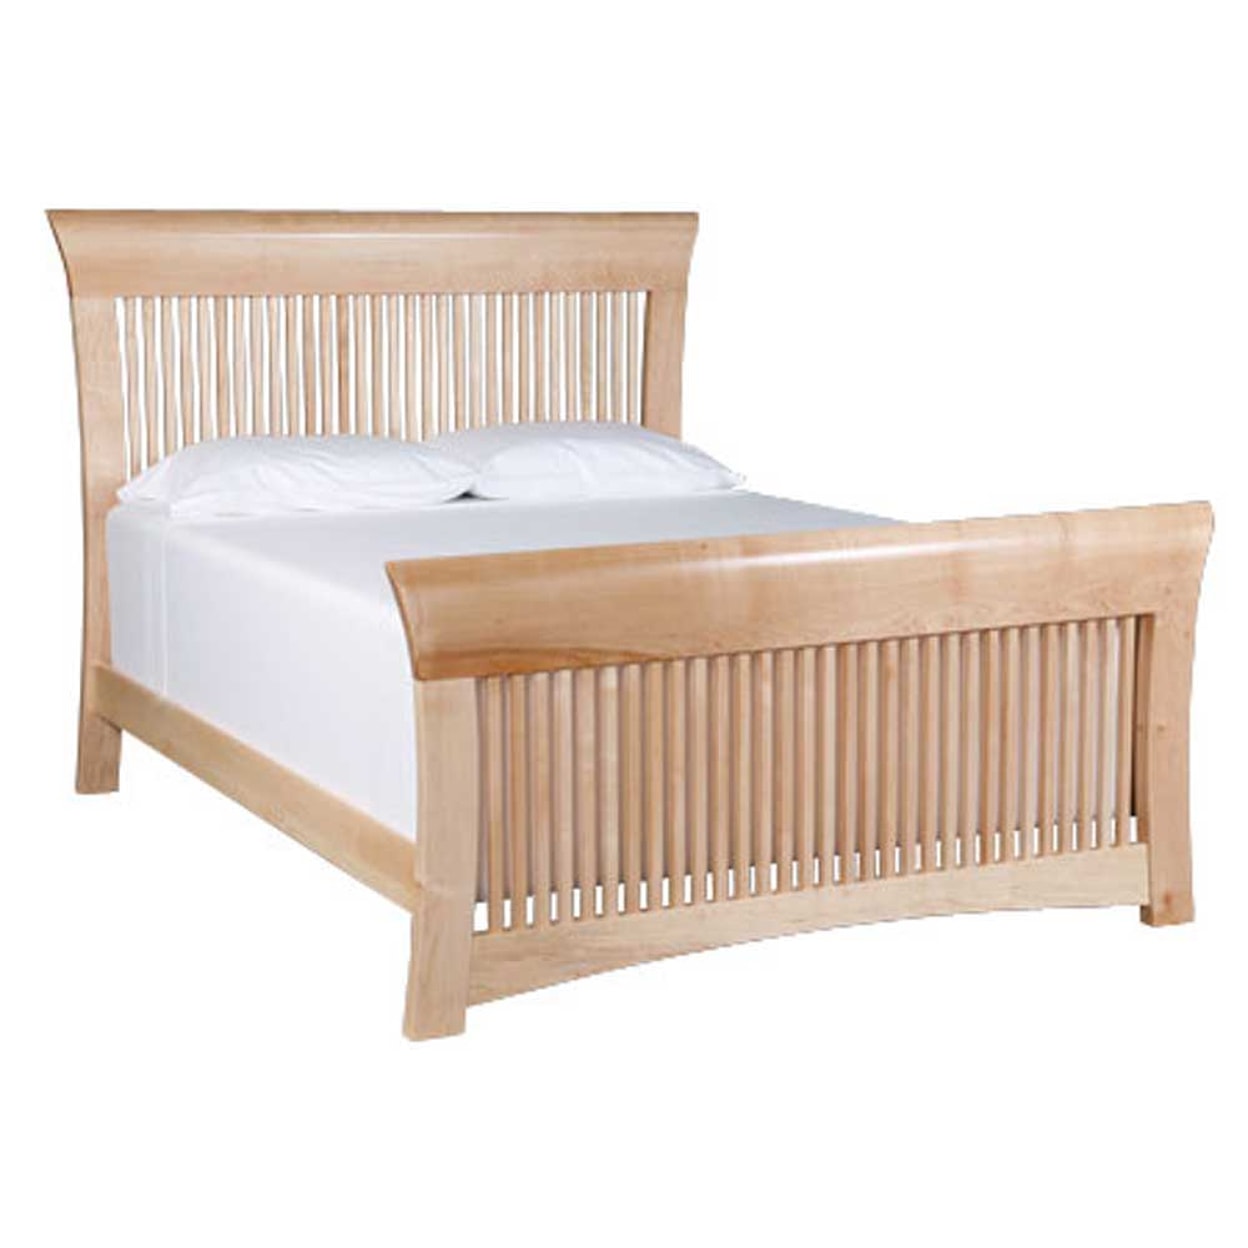 Simply Amish Loft Twin Spindle Bed